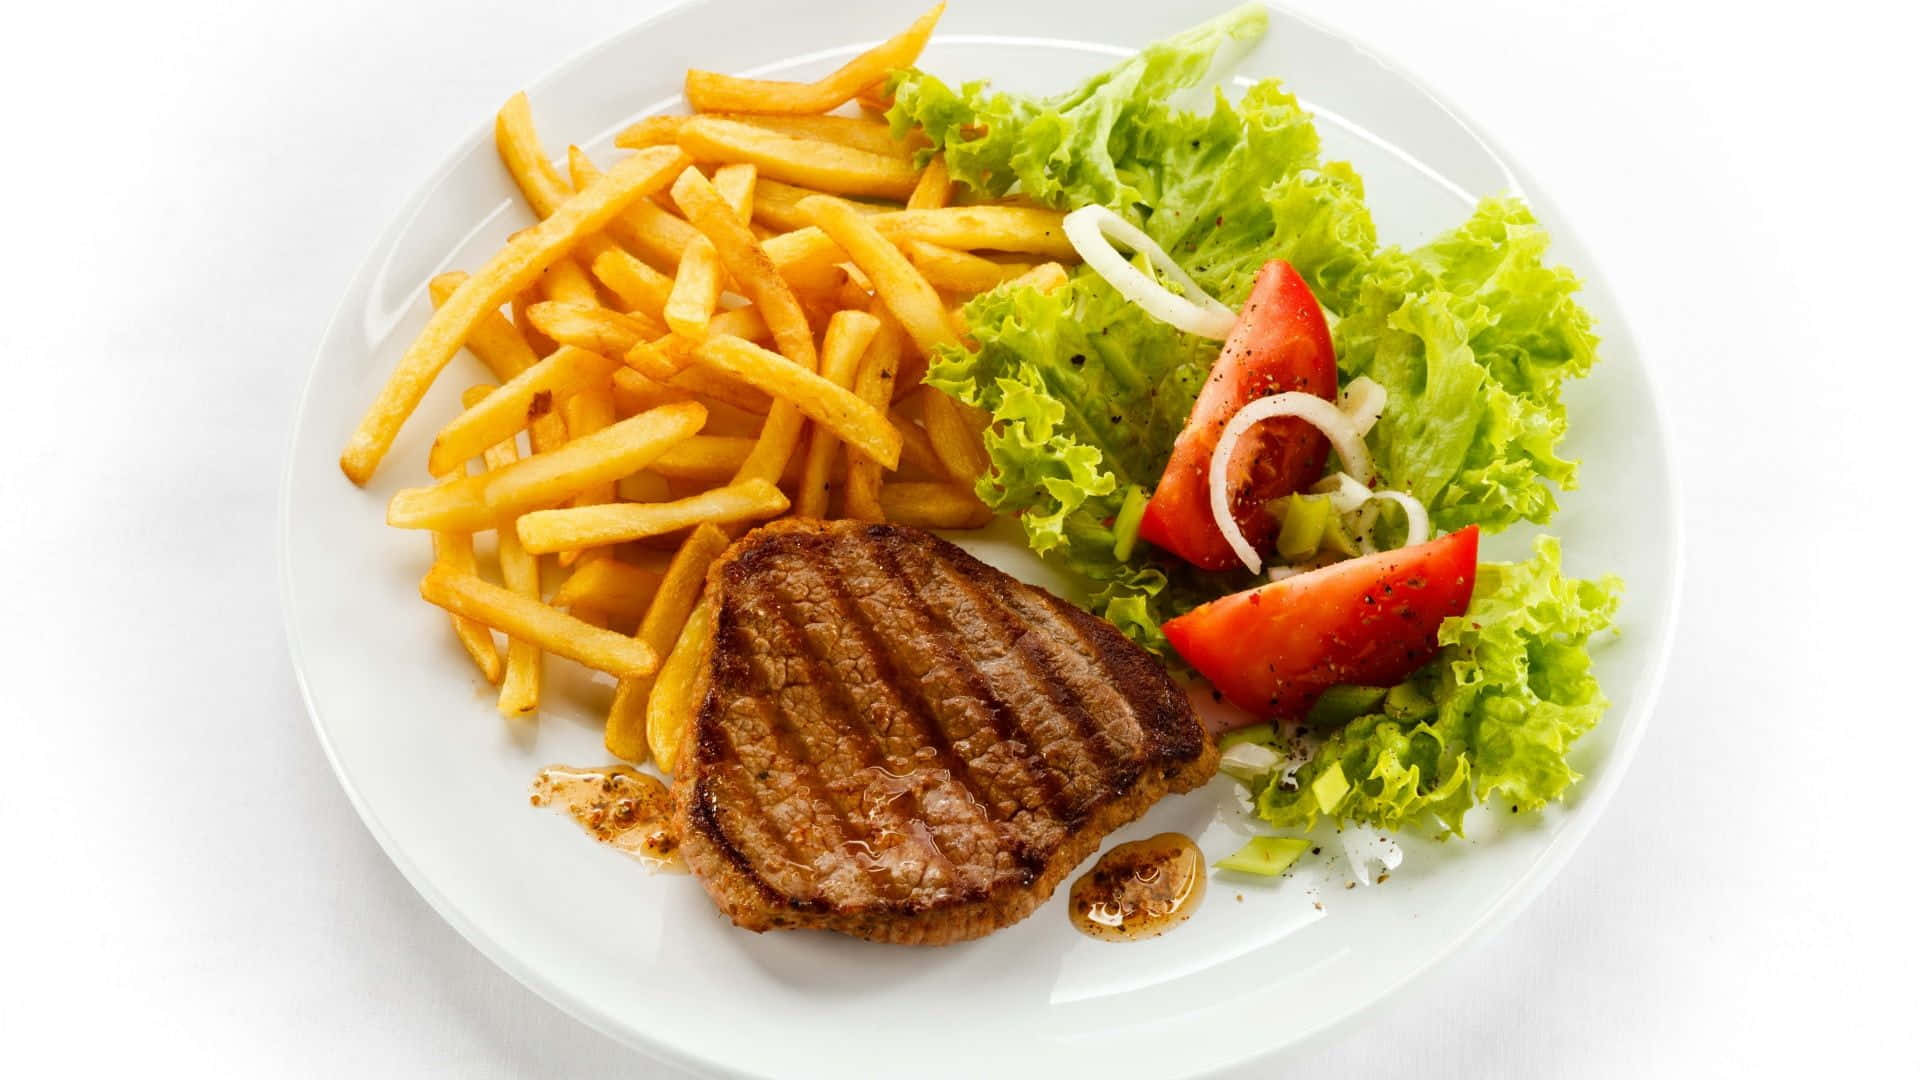 A Plate With Steak, Fries And Salad